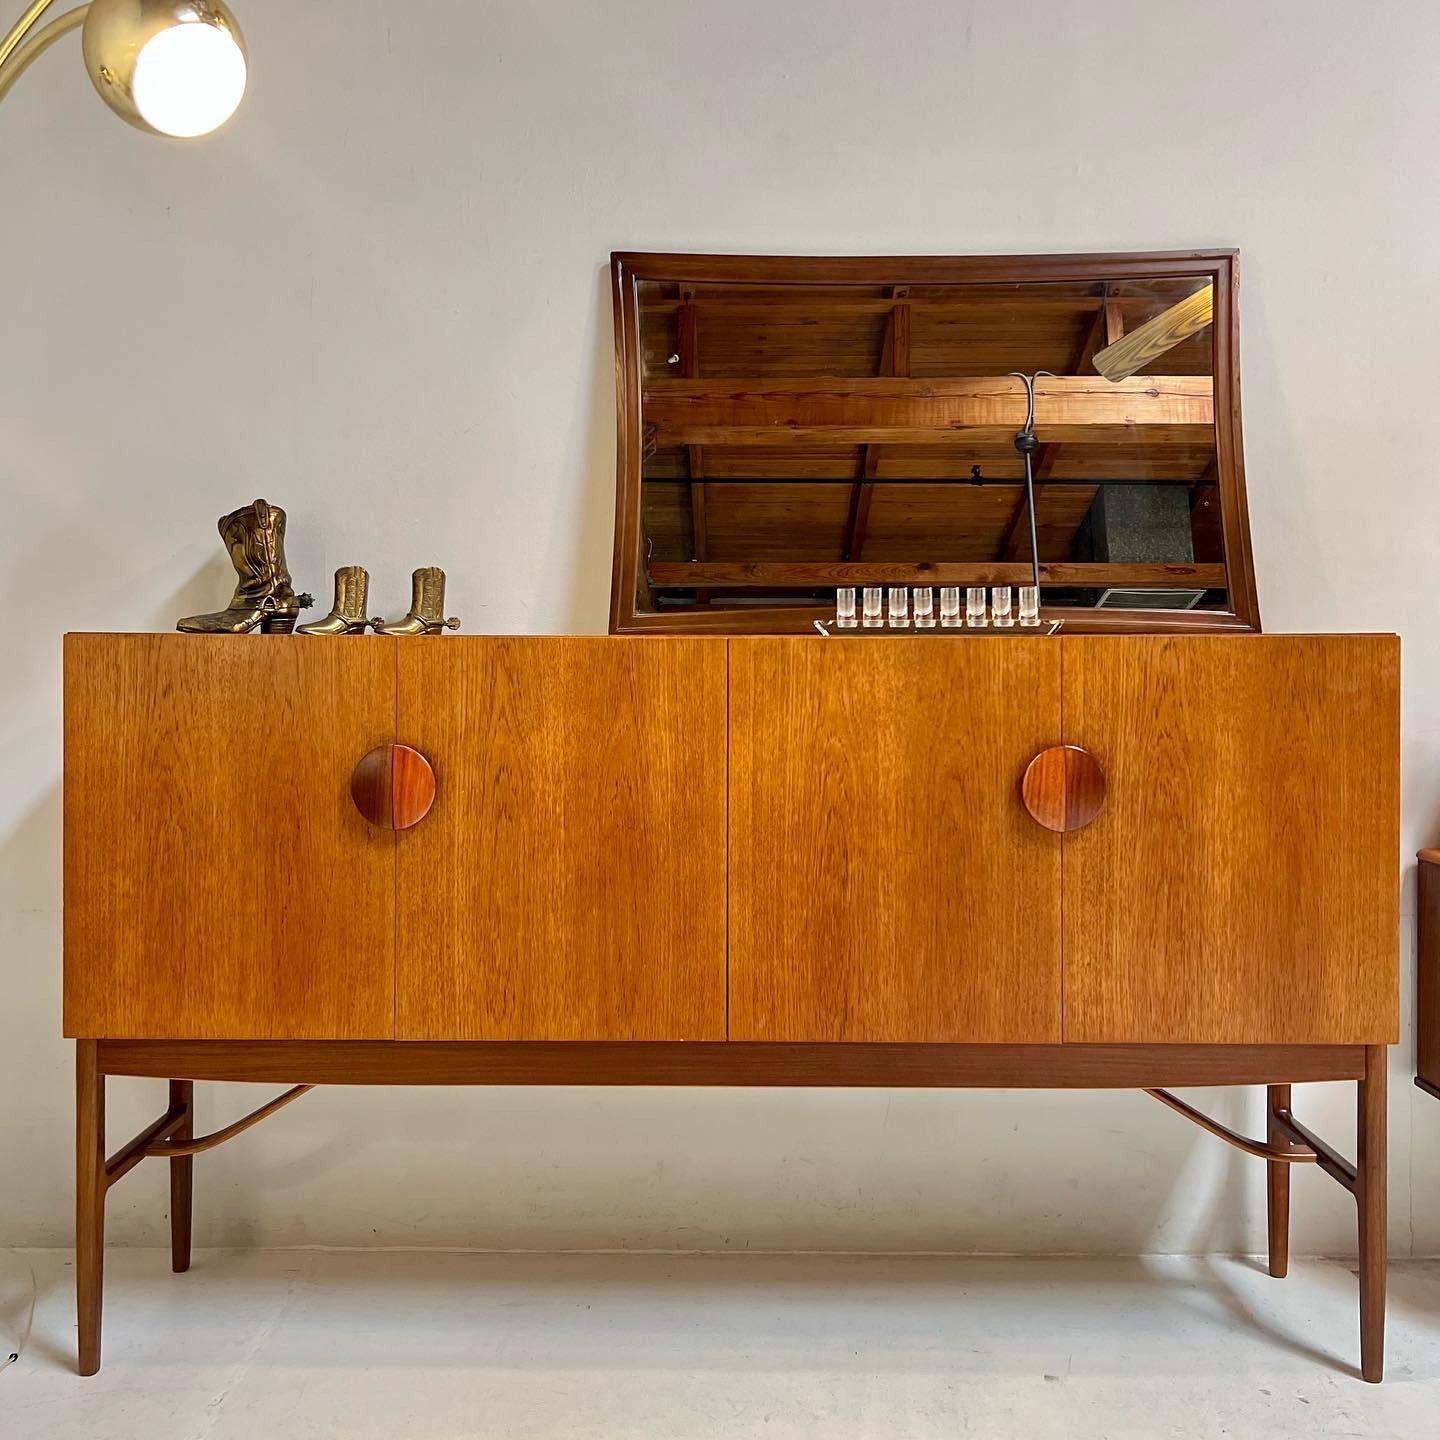 A beautiful Model 4060 high sideboard designed by Danish designer Ib Kofod Larsen for G-Plan, and finished in teak with solid Bombay rosewood handles and afromosia legs. Simple and distinctive lines with large split circular handles. This beautiful